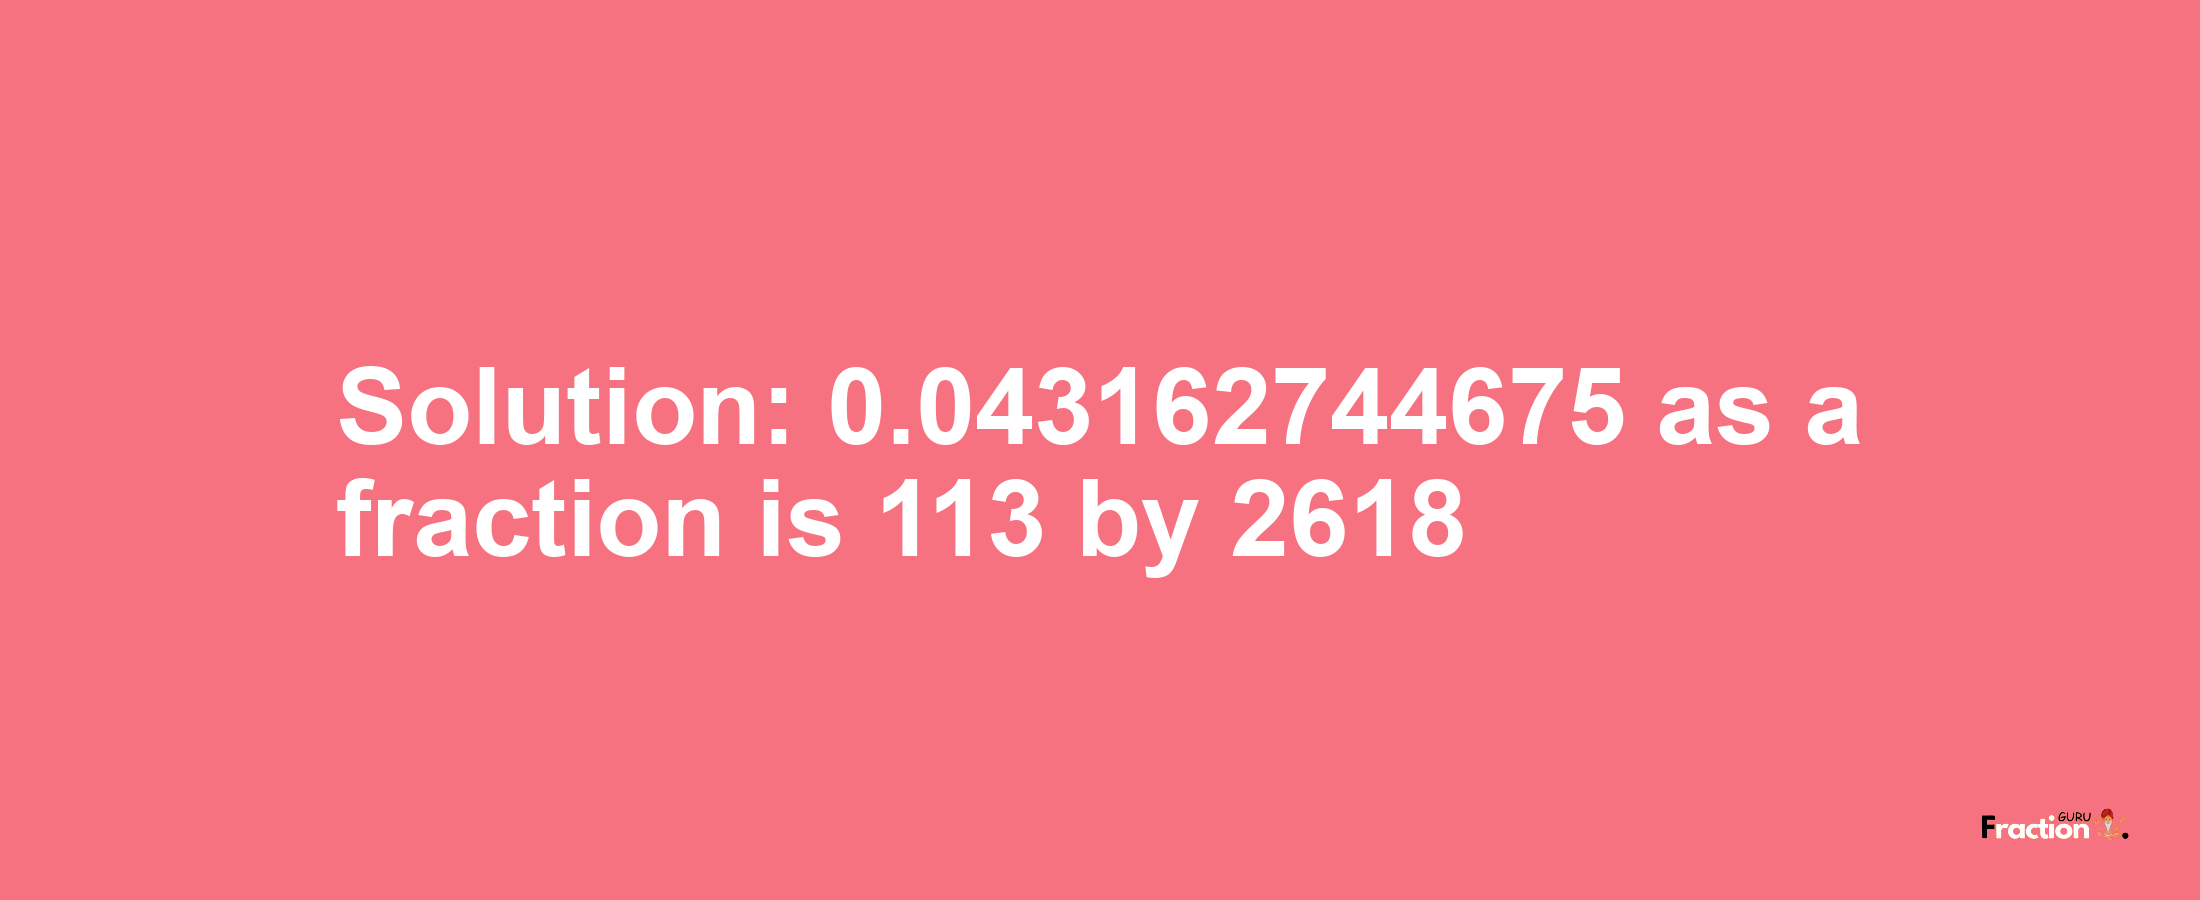 Solution:0.043162744675 as a fraction is 113/2618